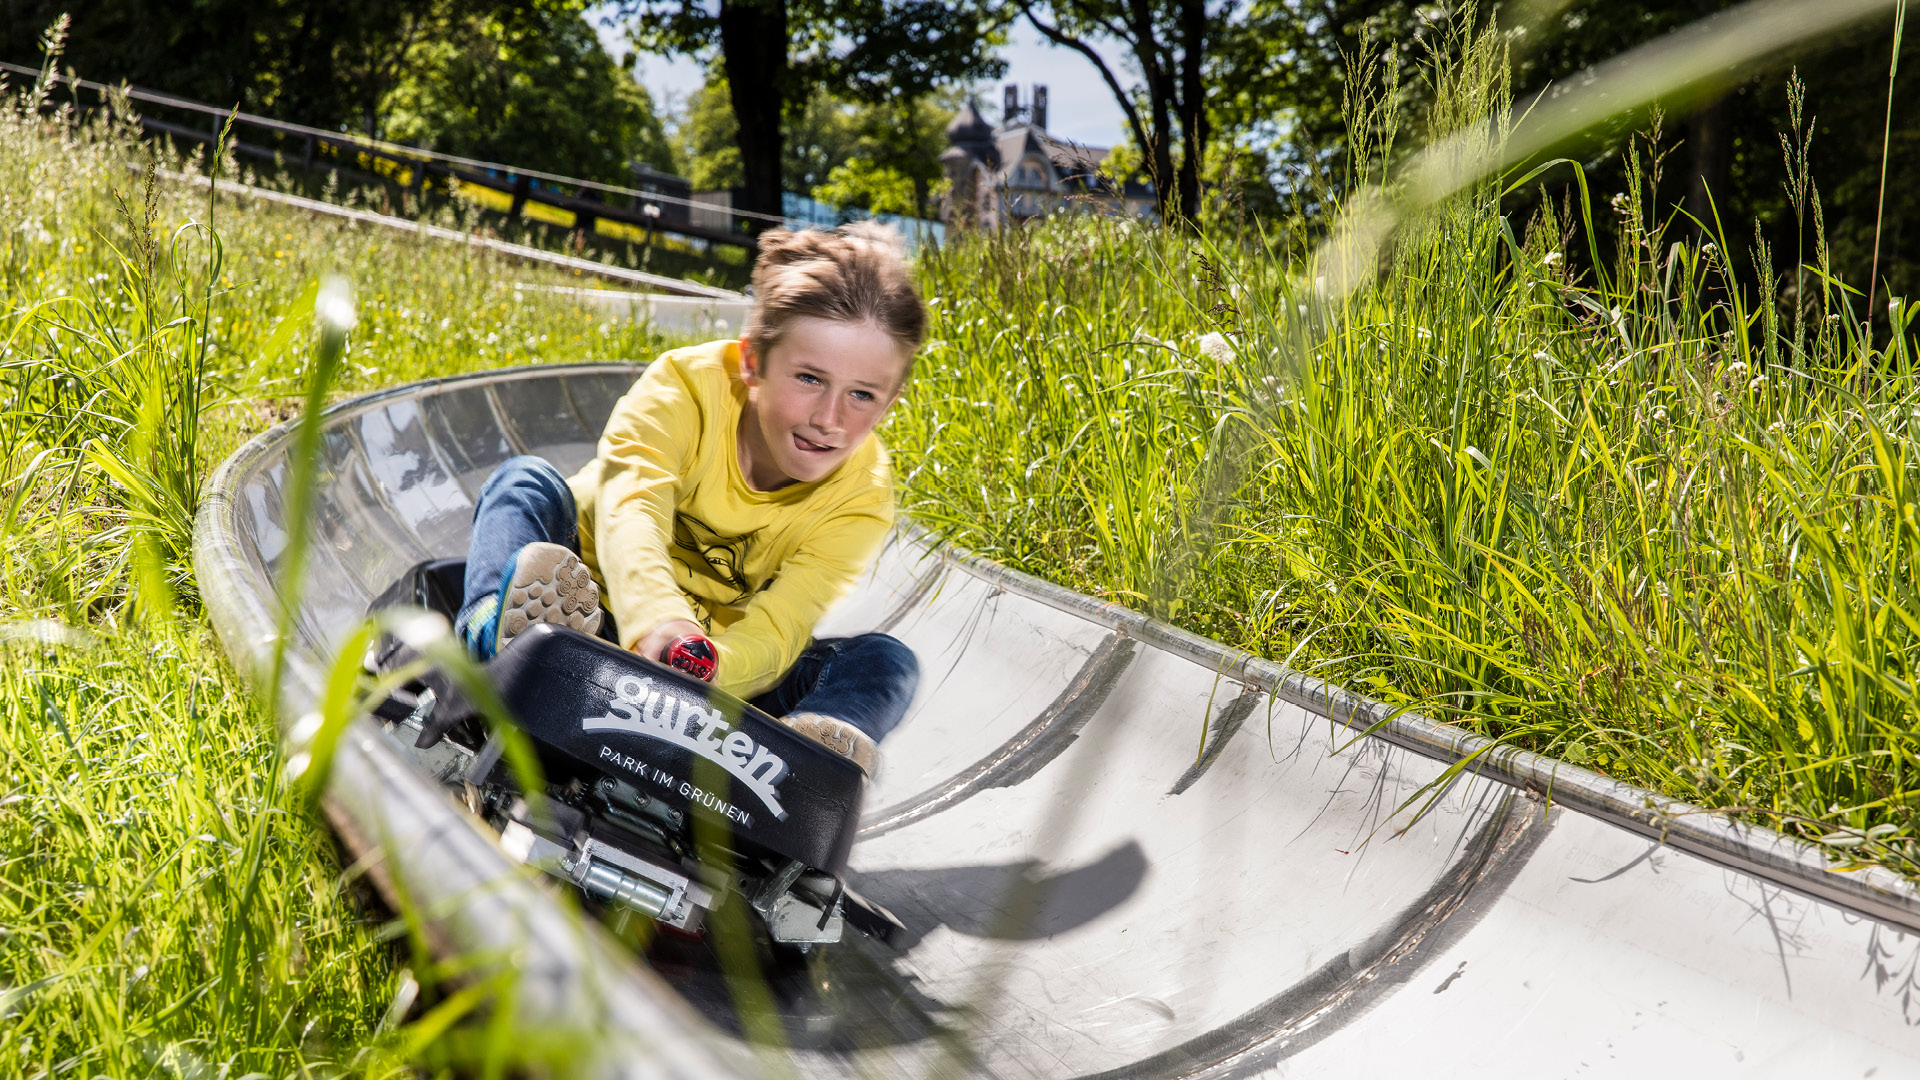 A delighted child racing down the toboggan run